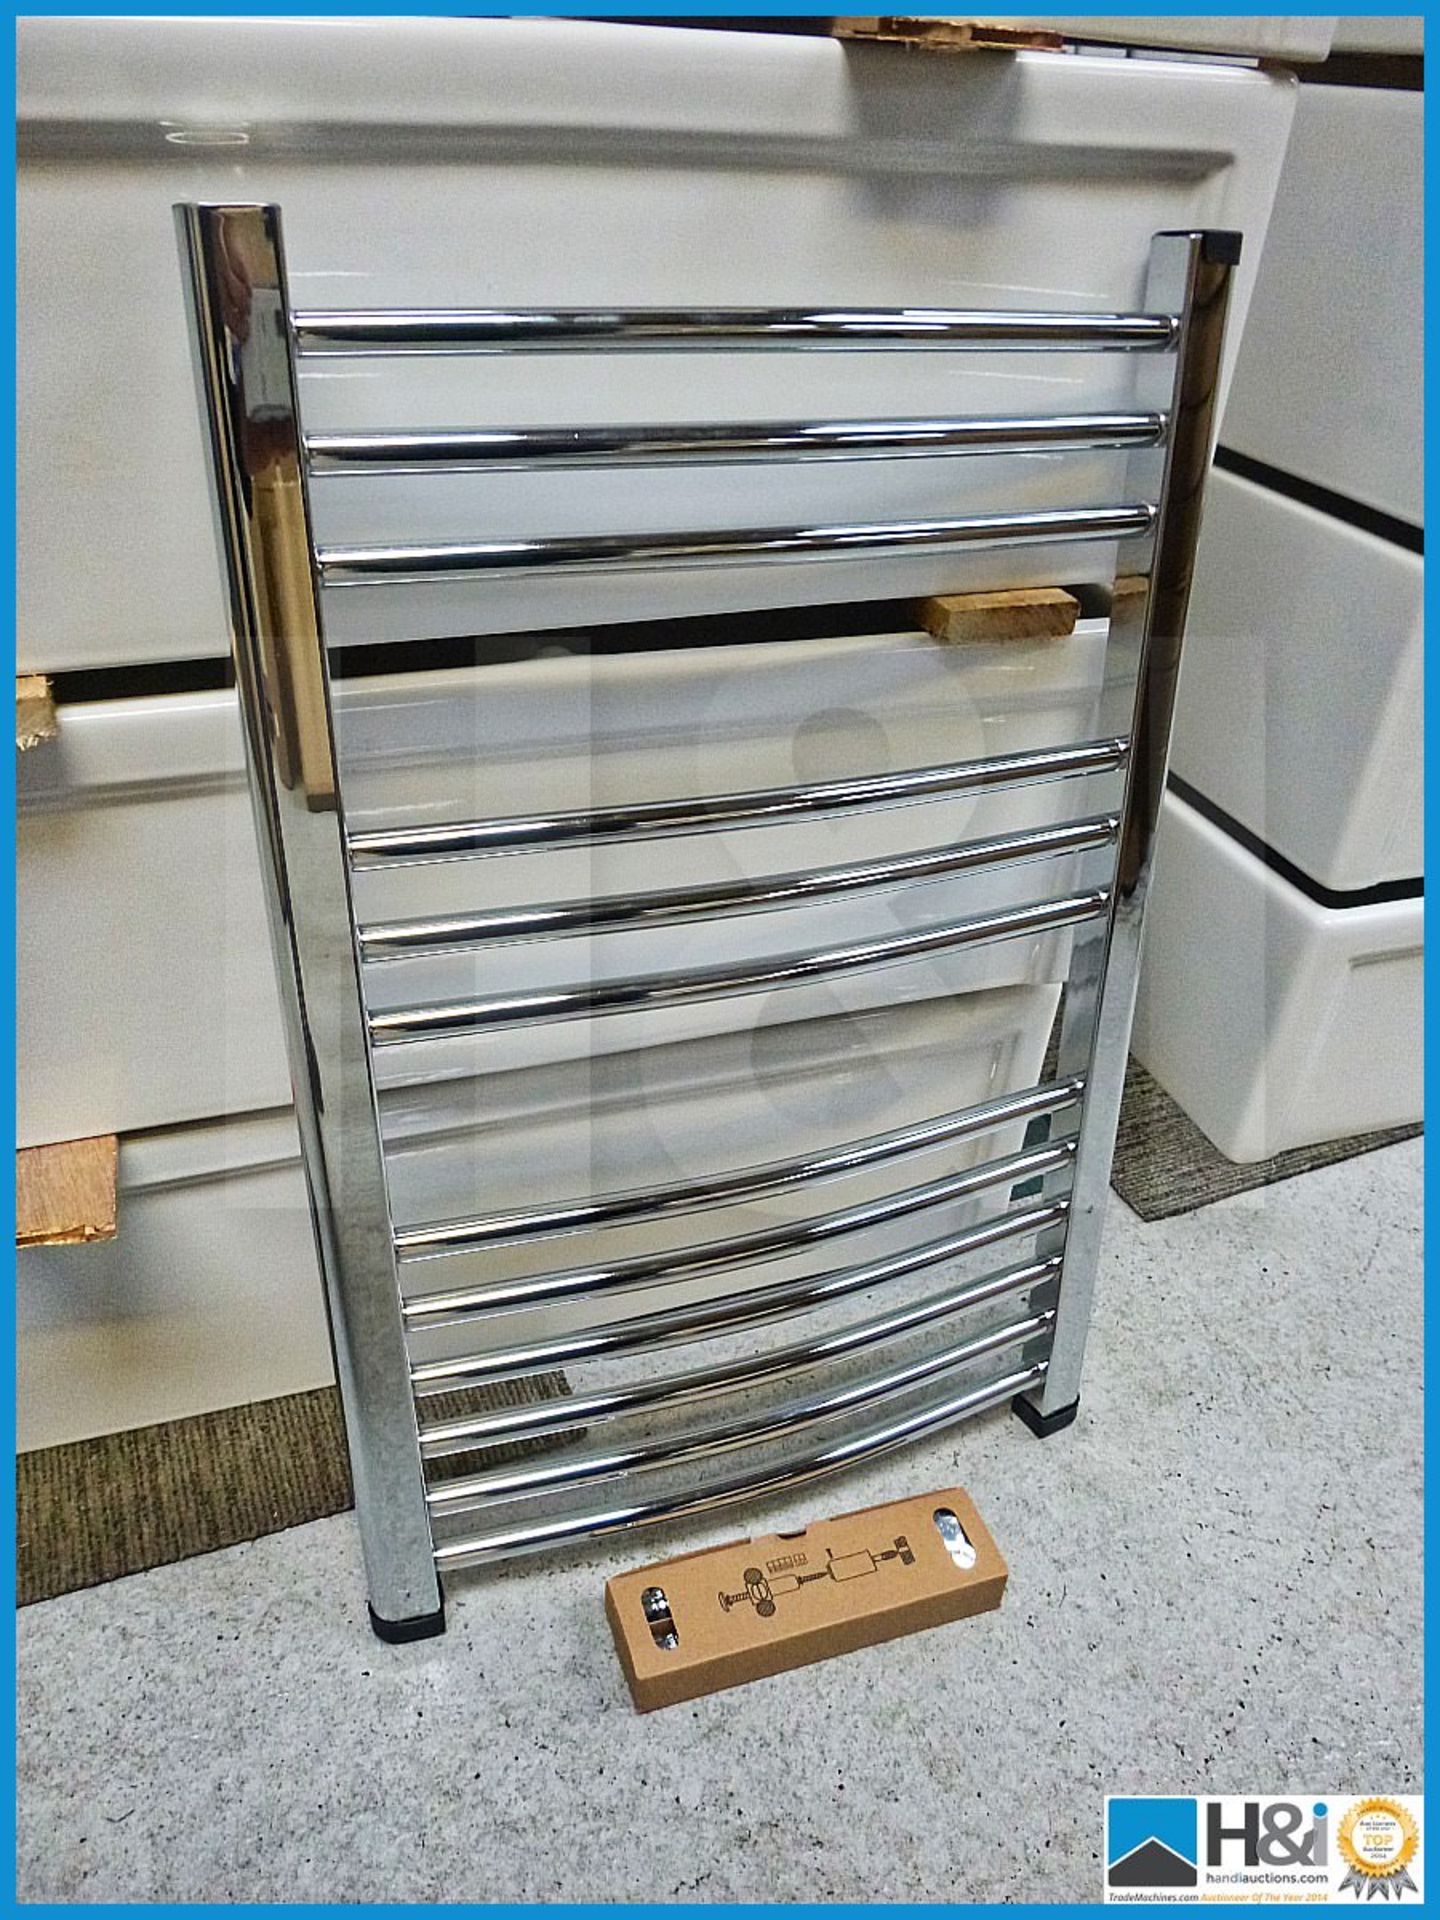 Chrome towel radiator 800mmX500mm Complete with fittings RRP 149 GBP